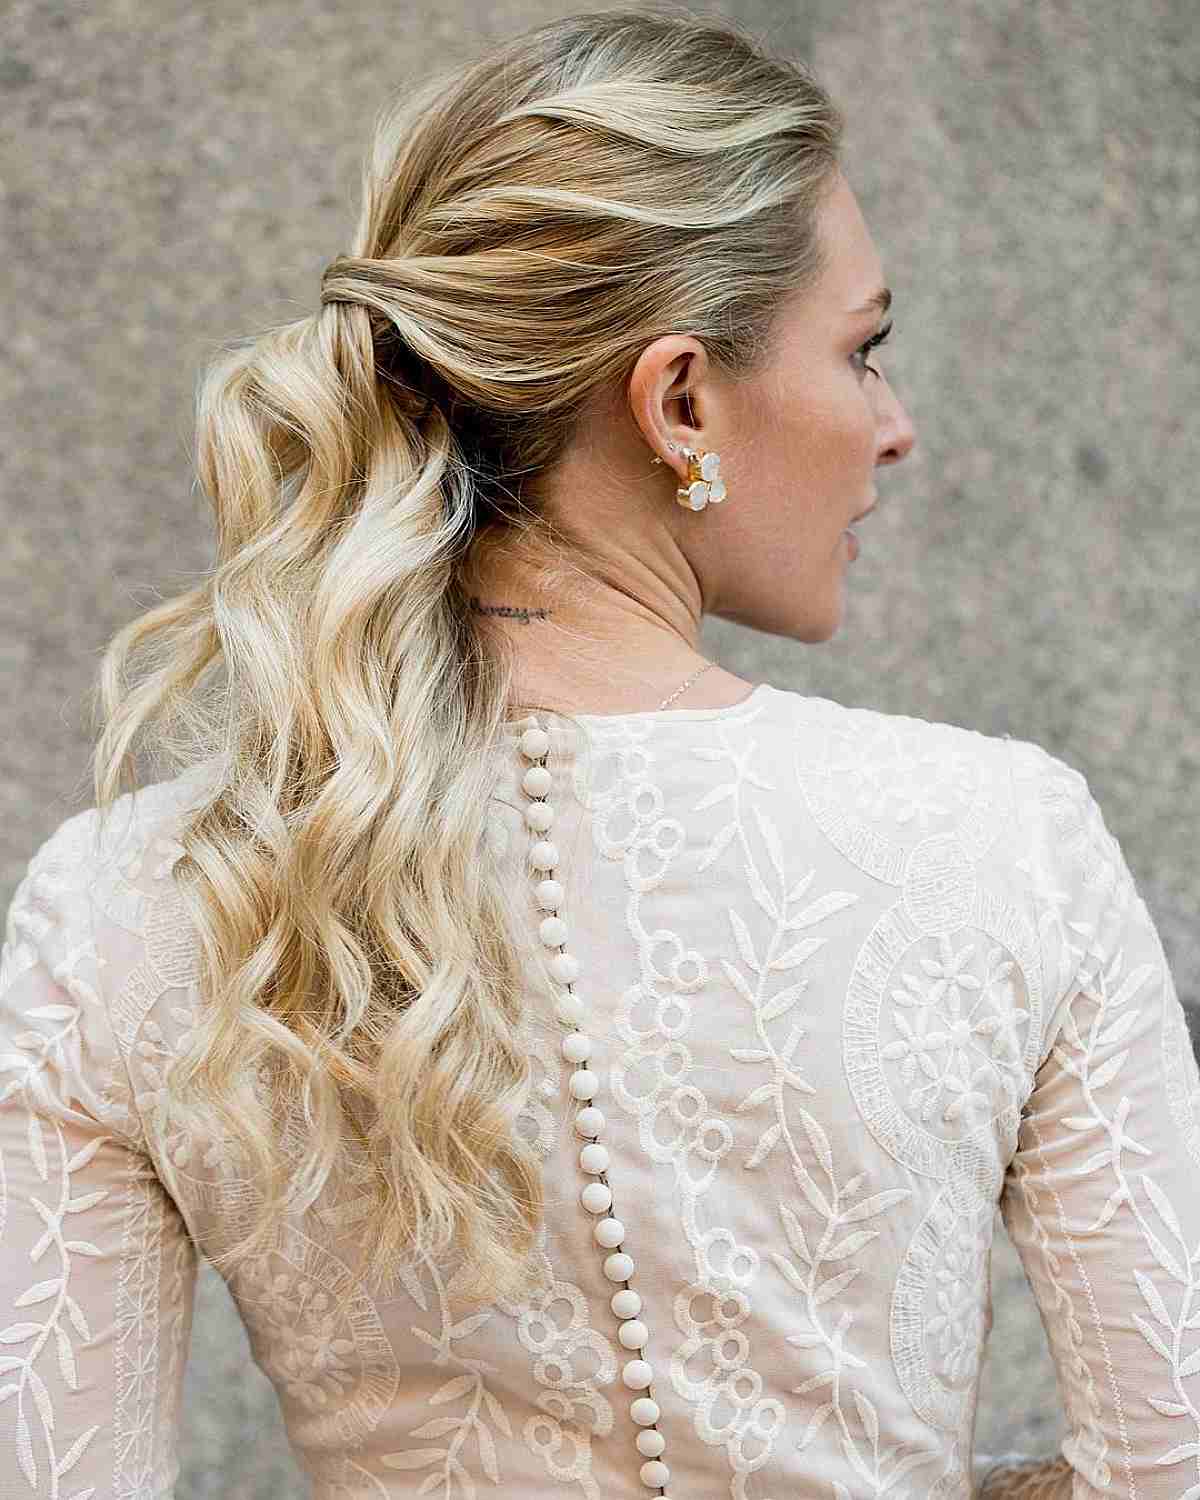 Low Sleek Ponytail with Waves